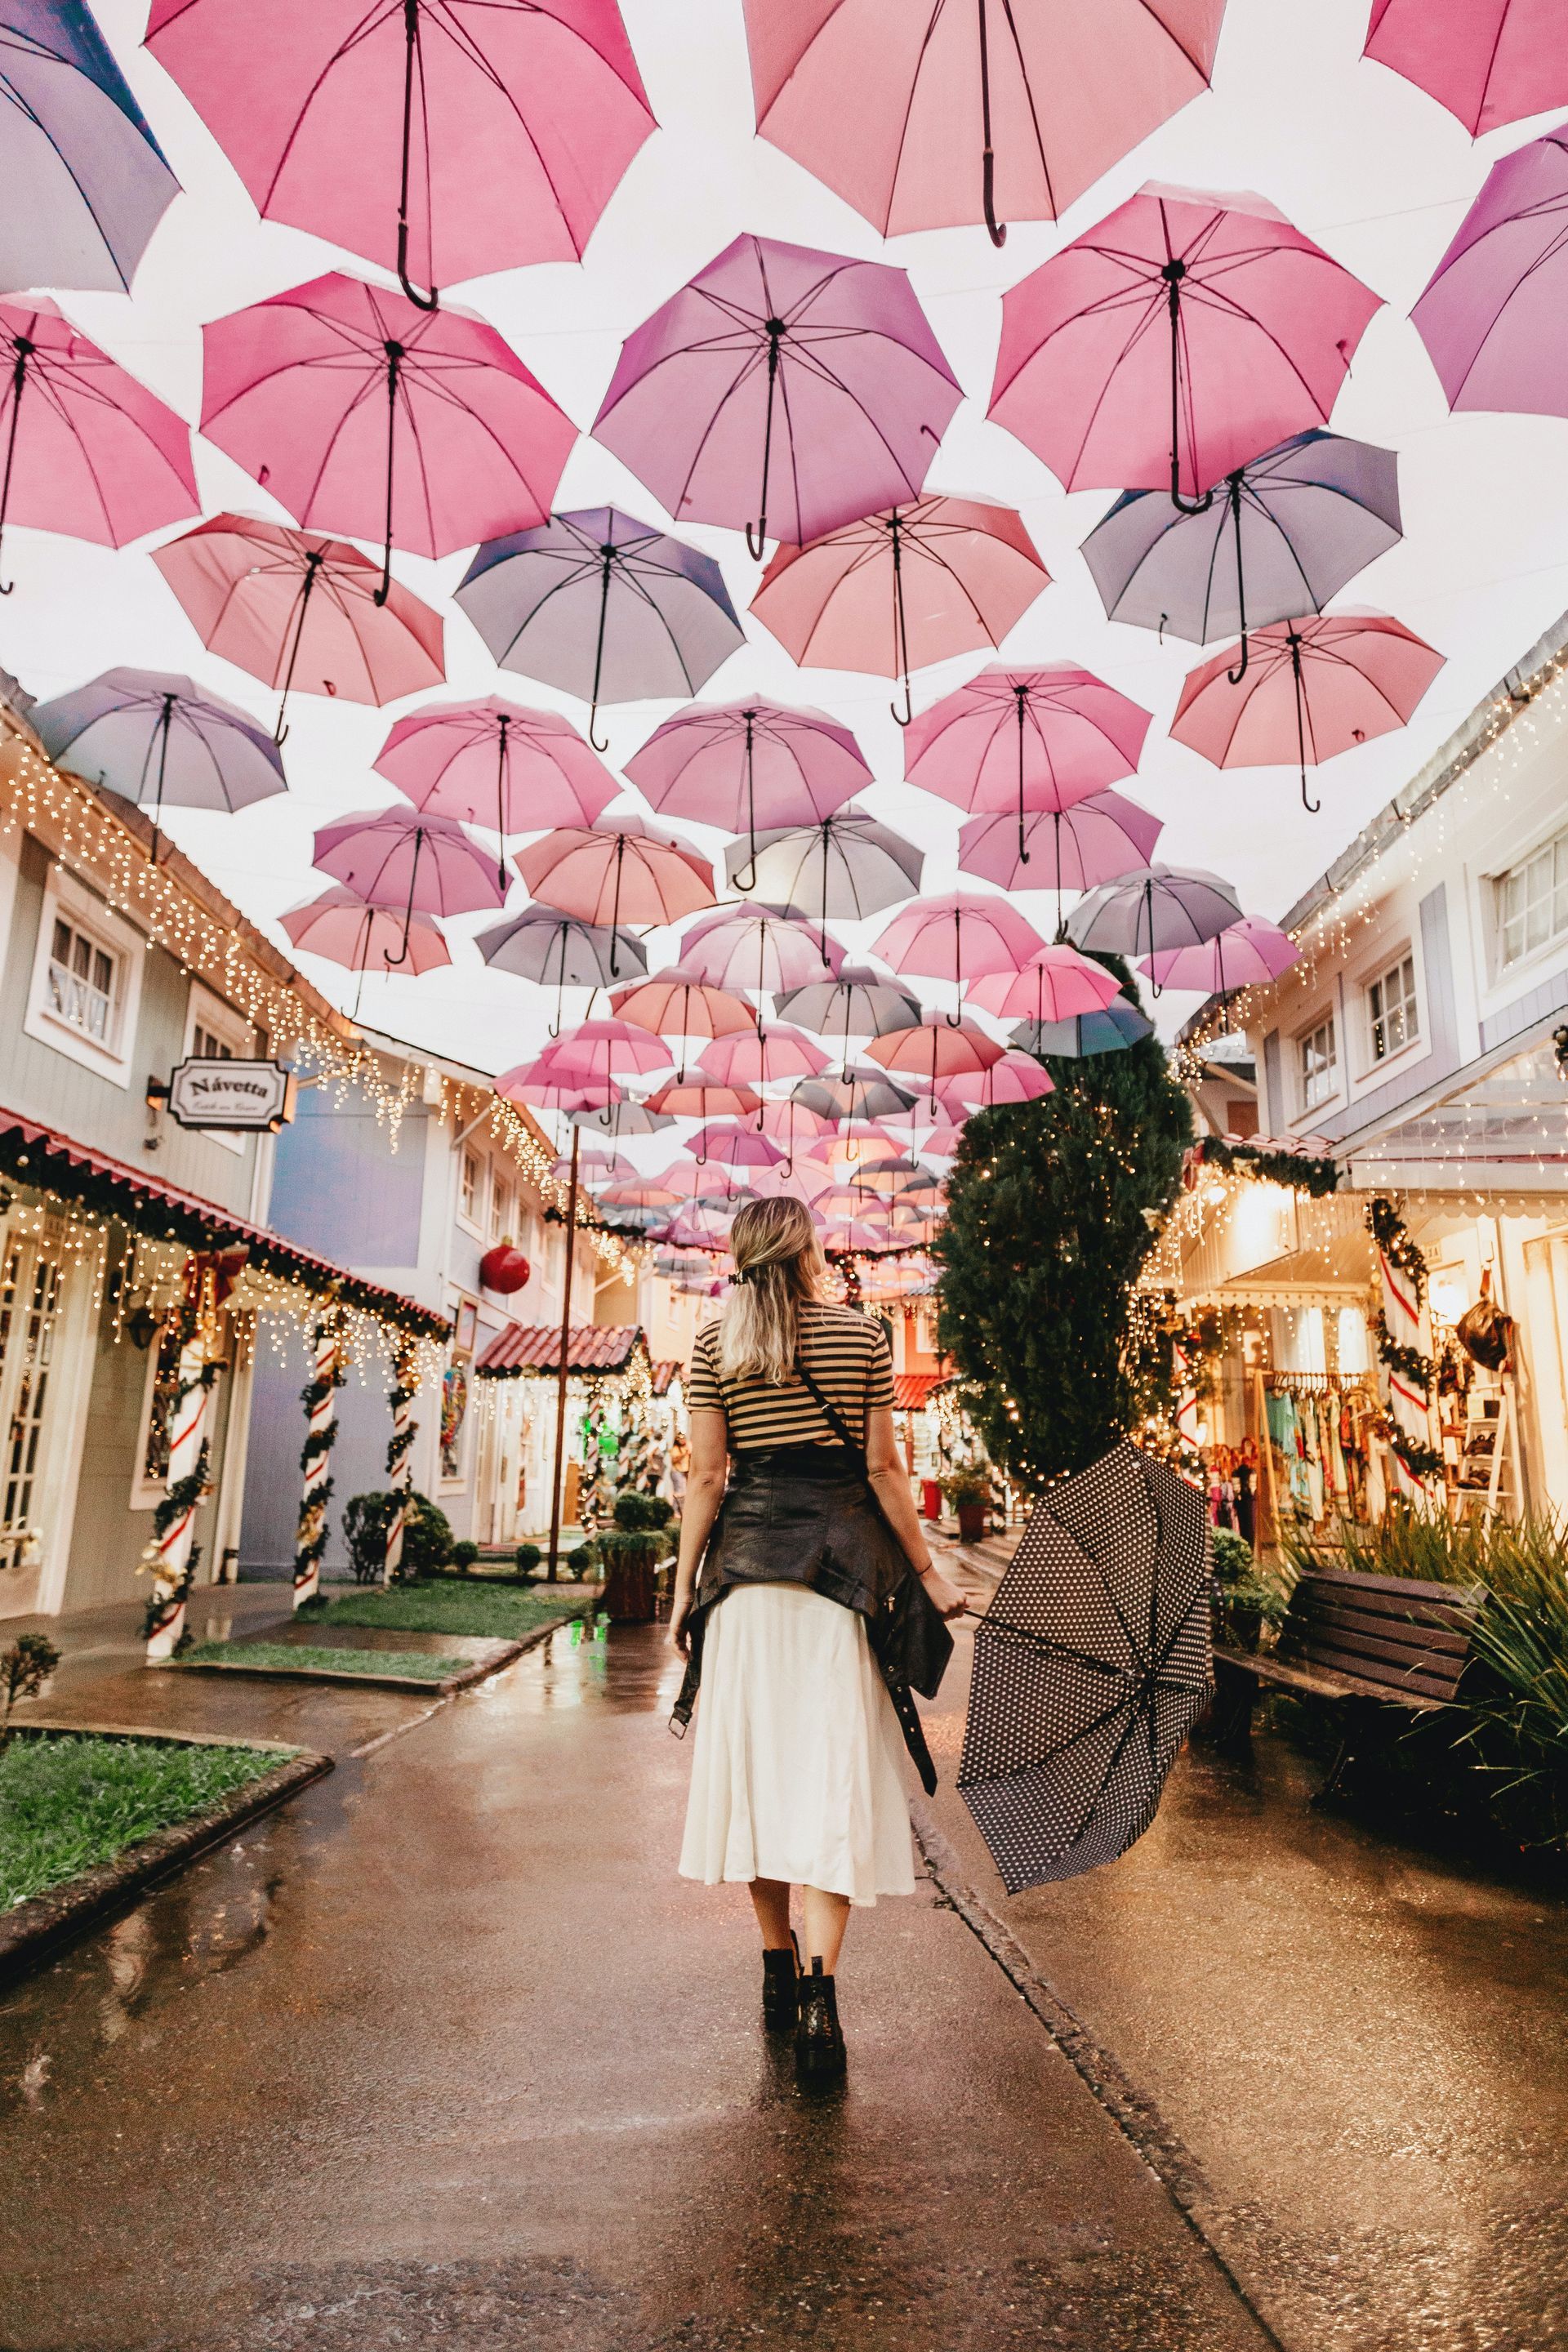 a woman is walking down a street with umbrellas hanging from the ceiling .